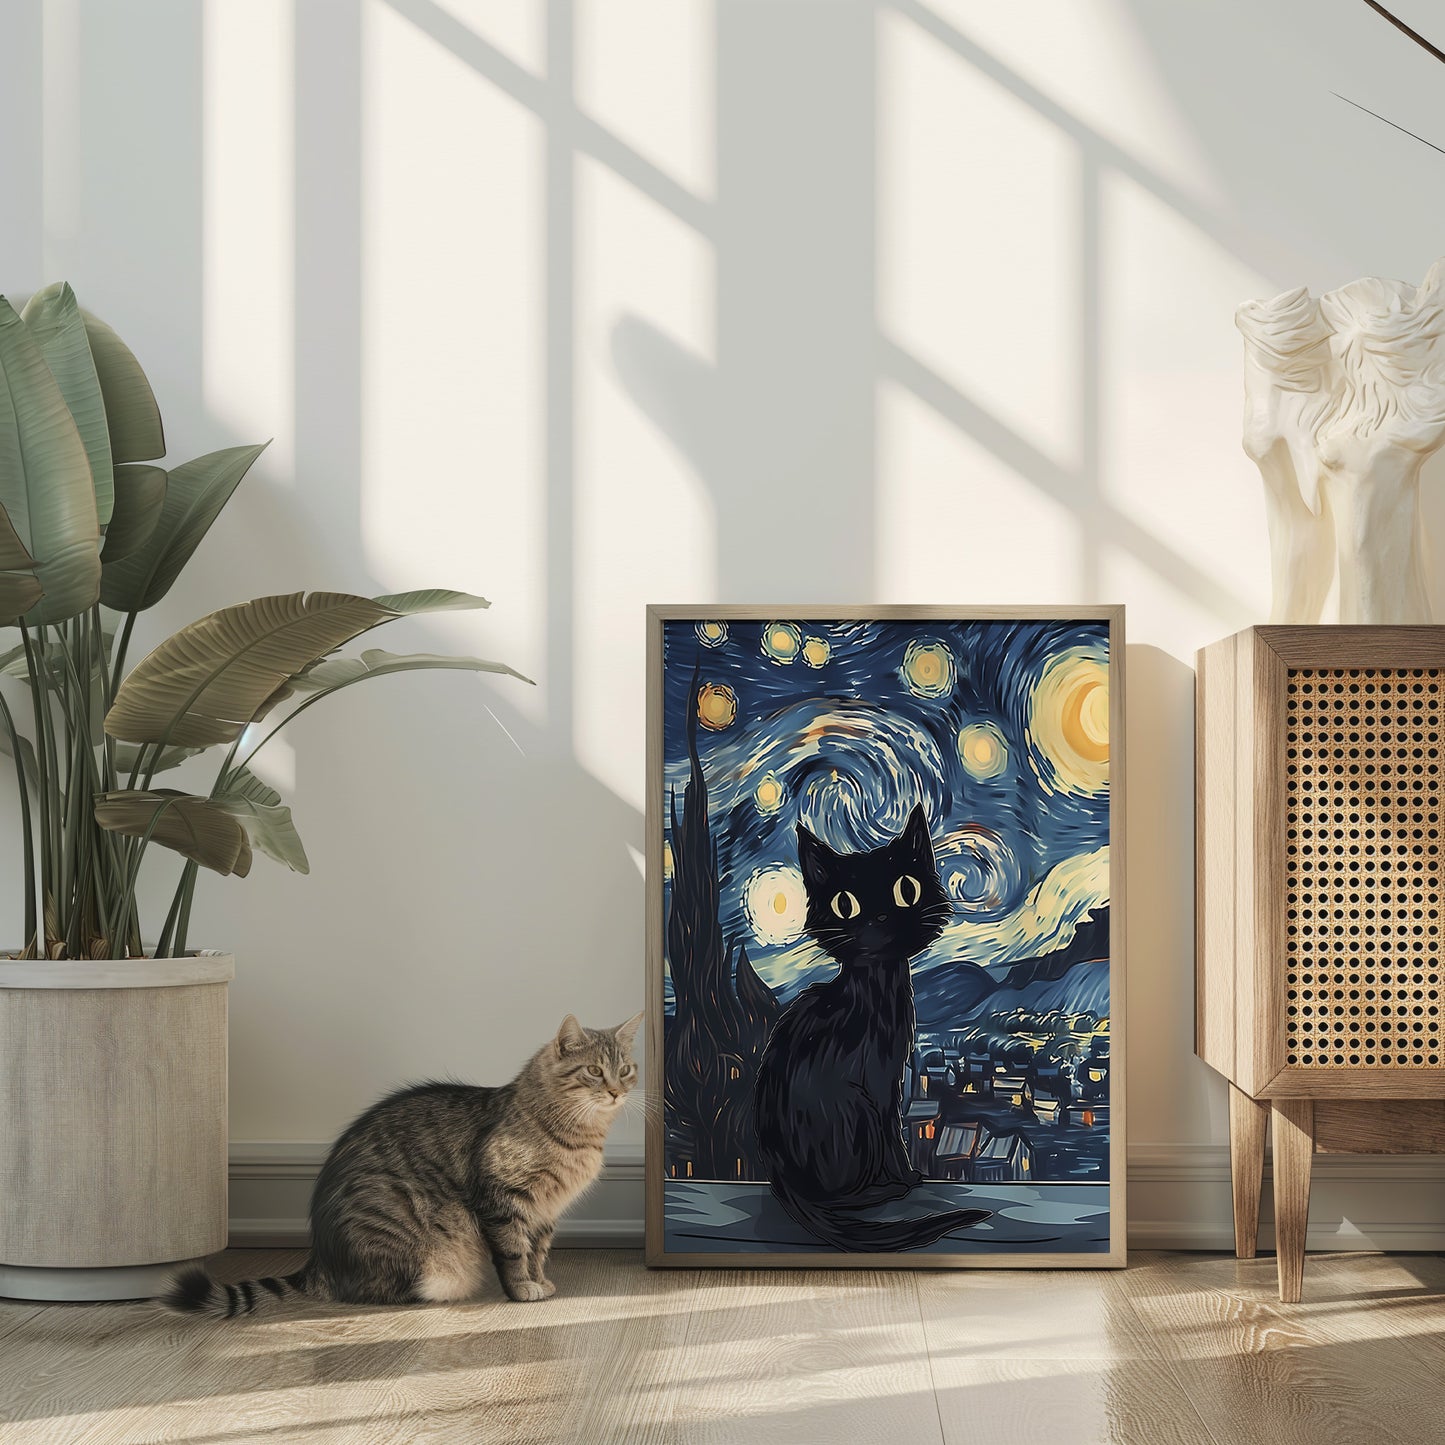 A real cat sitting next to a framed painting of a stylized black cat under a starry sky.